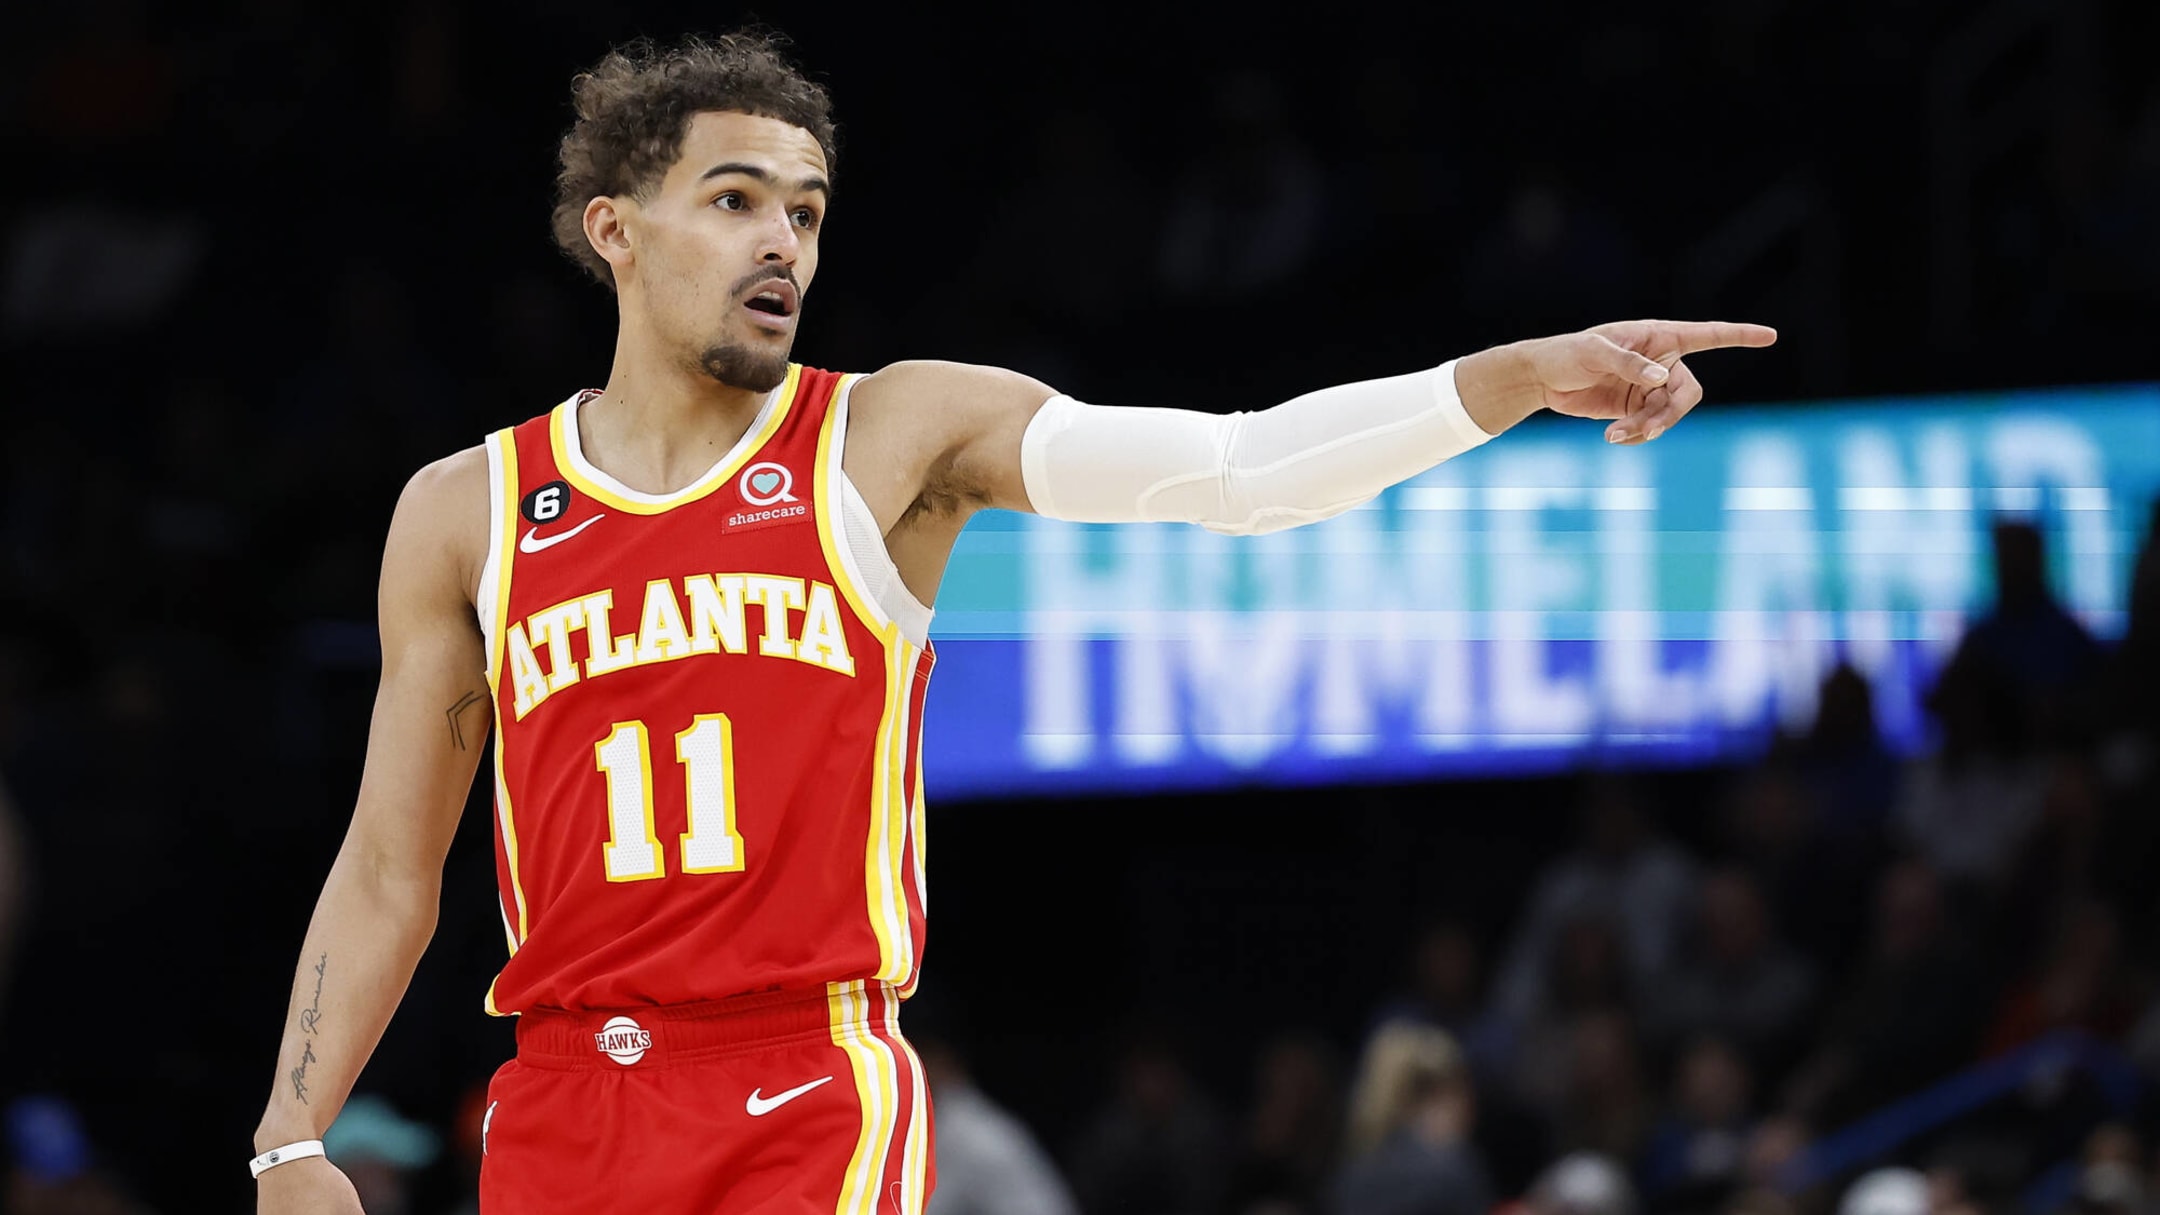 Trade Packages for Atlanta Hawks Star Guard Trae Young